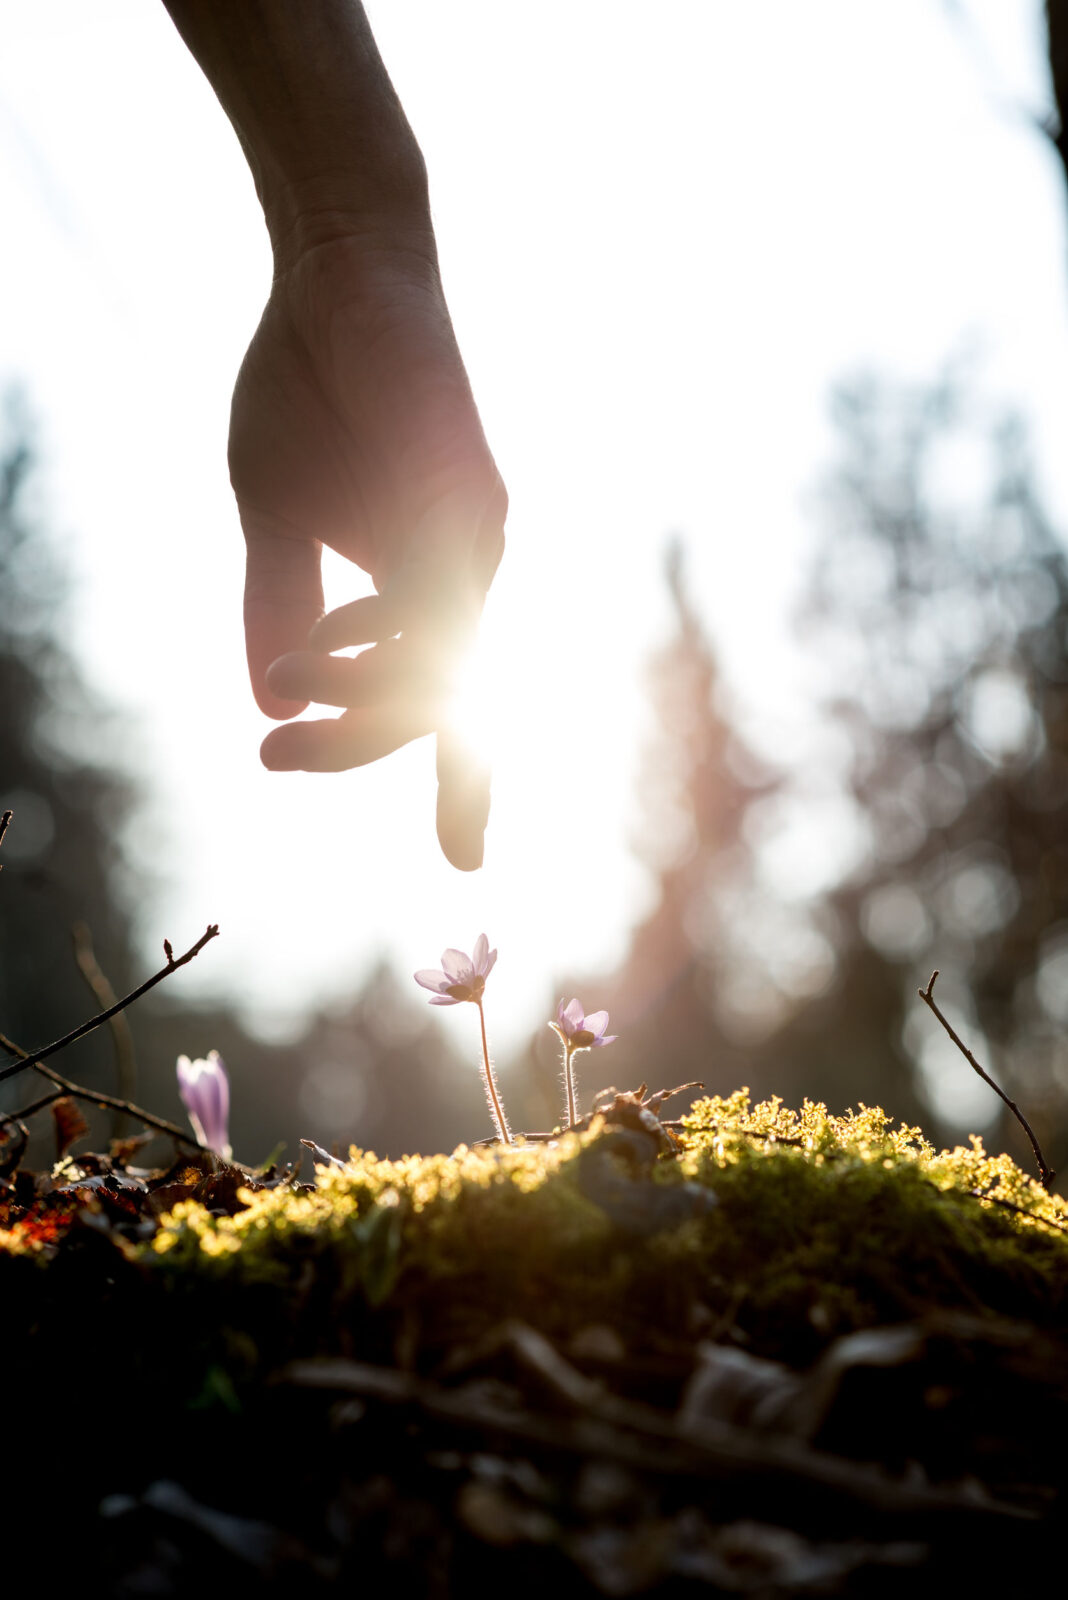 Conceptual image with a close up of the hand of a man above a mossy rock with new delicate blue flowers back lit by the sun in a spring garden.